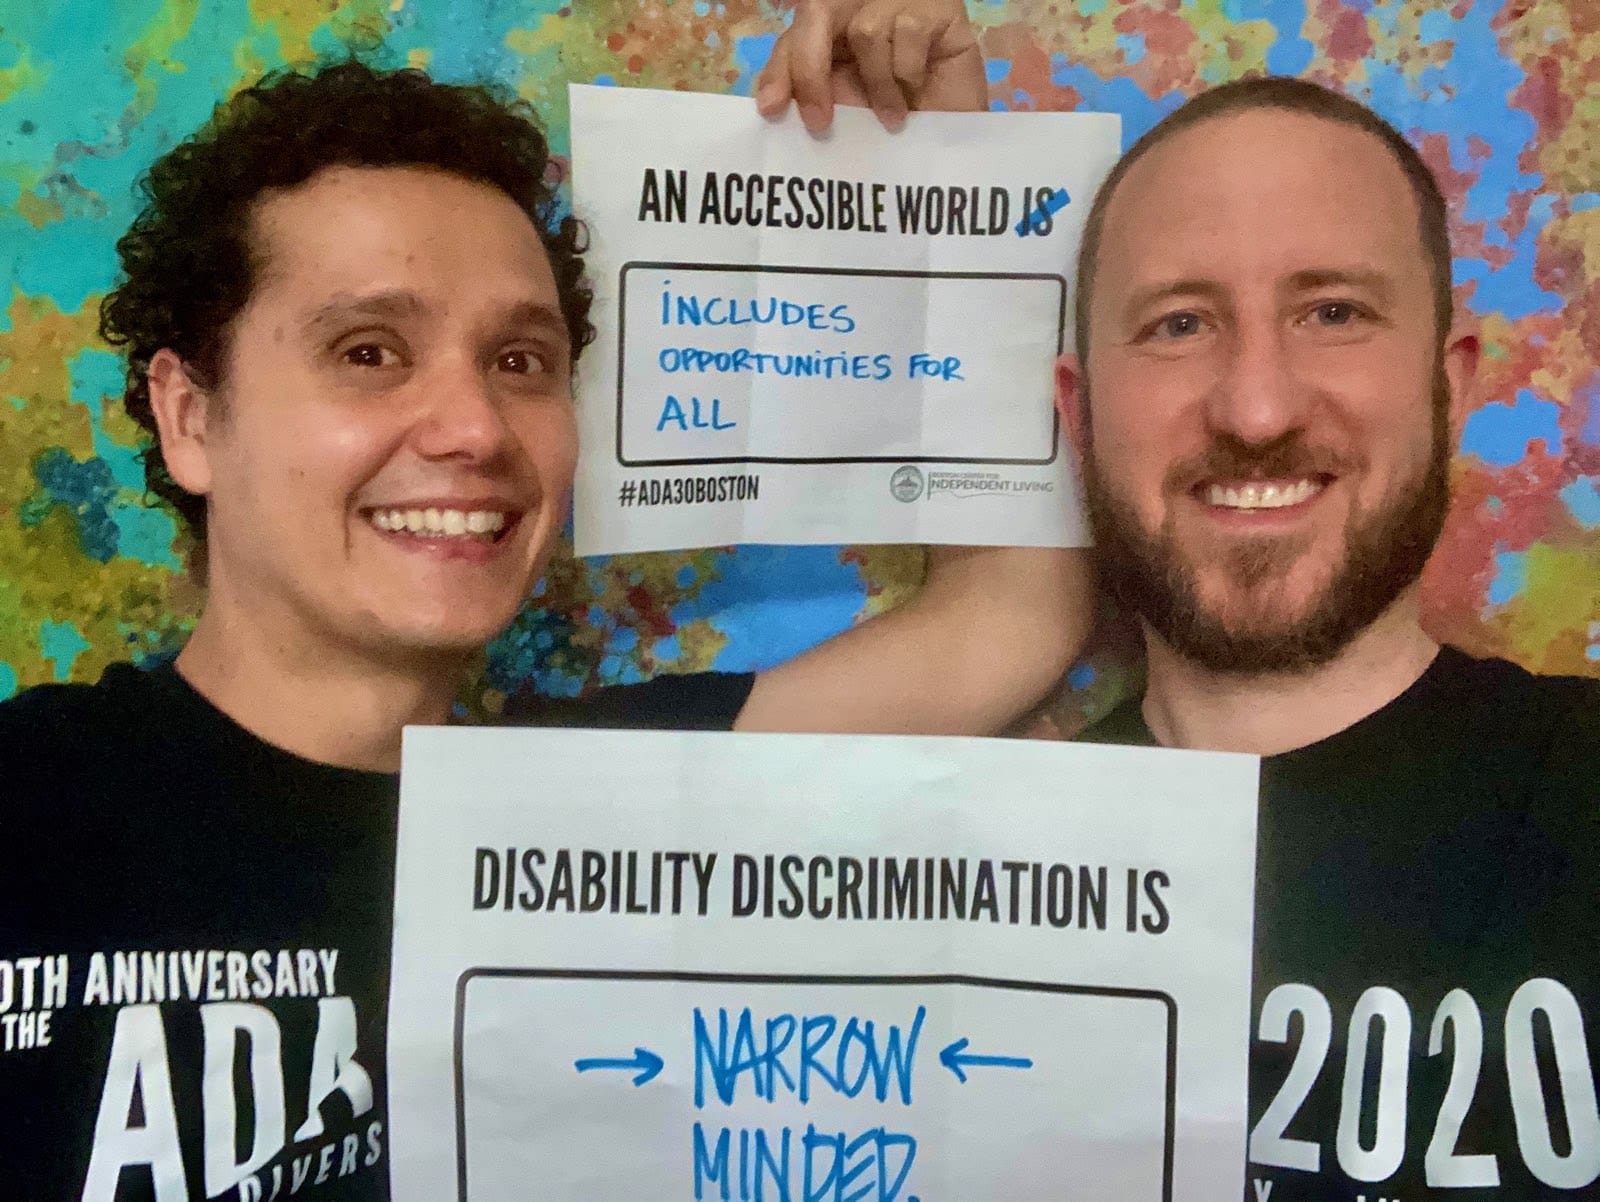 Two people wearing black ADA 30 t-shirts hold signs that read AN ACCESSIBLE WORLD INCLUDES OPPORTUNITIES FOR ALL and DISABILITY DISCRIMINATION IS NARROW MINDED.